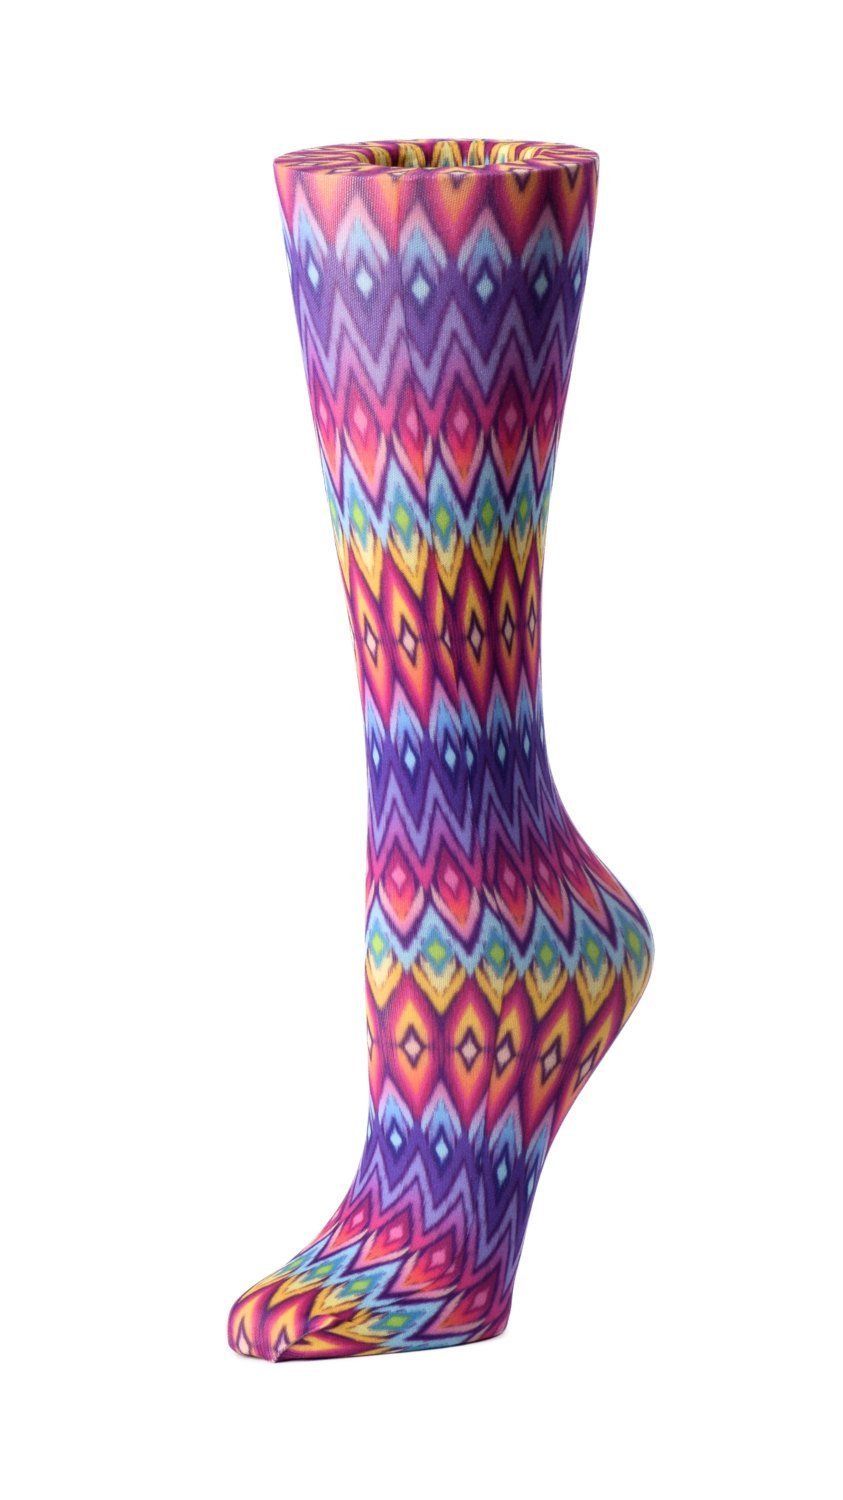 Cutieful Moderate Compression Socks 10-18 MMhg Wide Calf Knit Print Pattern Rainbow Diamond at Parker's Clothing and Shoes.